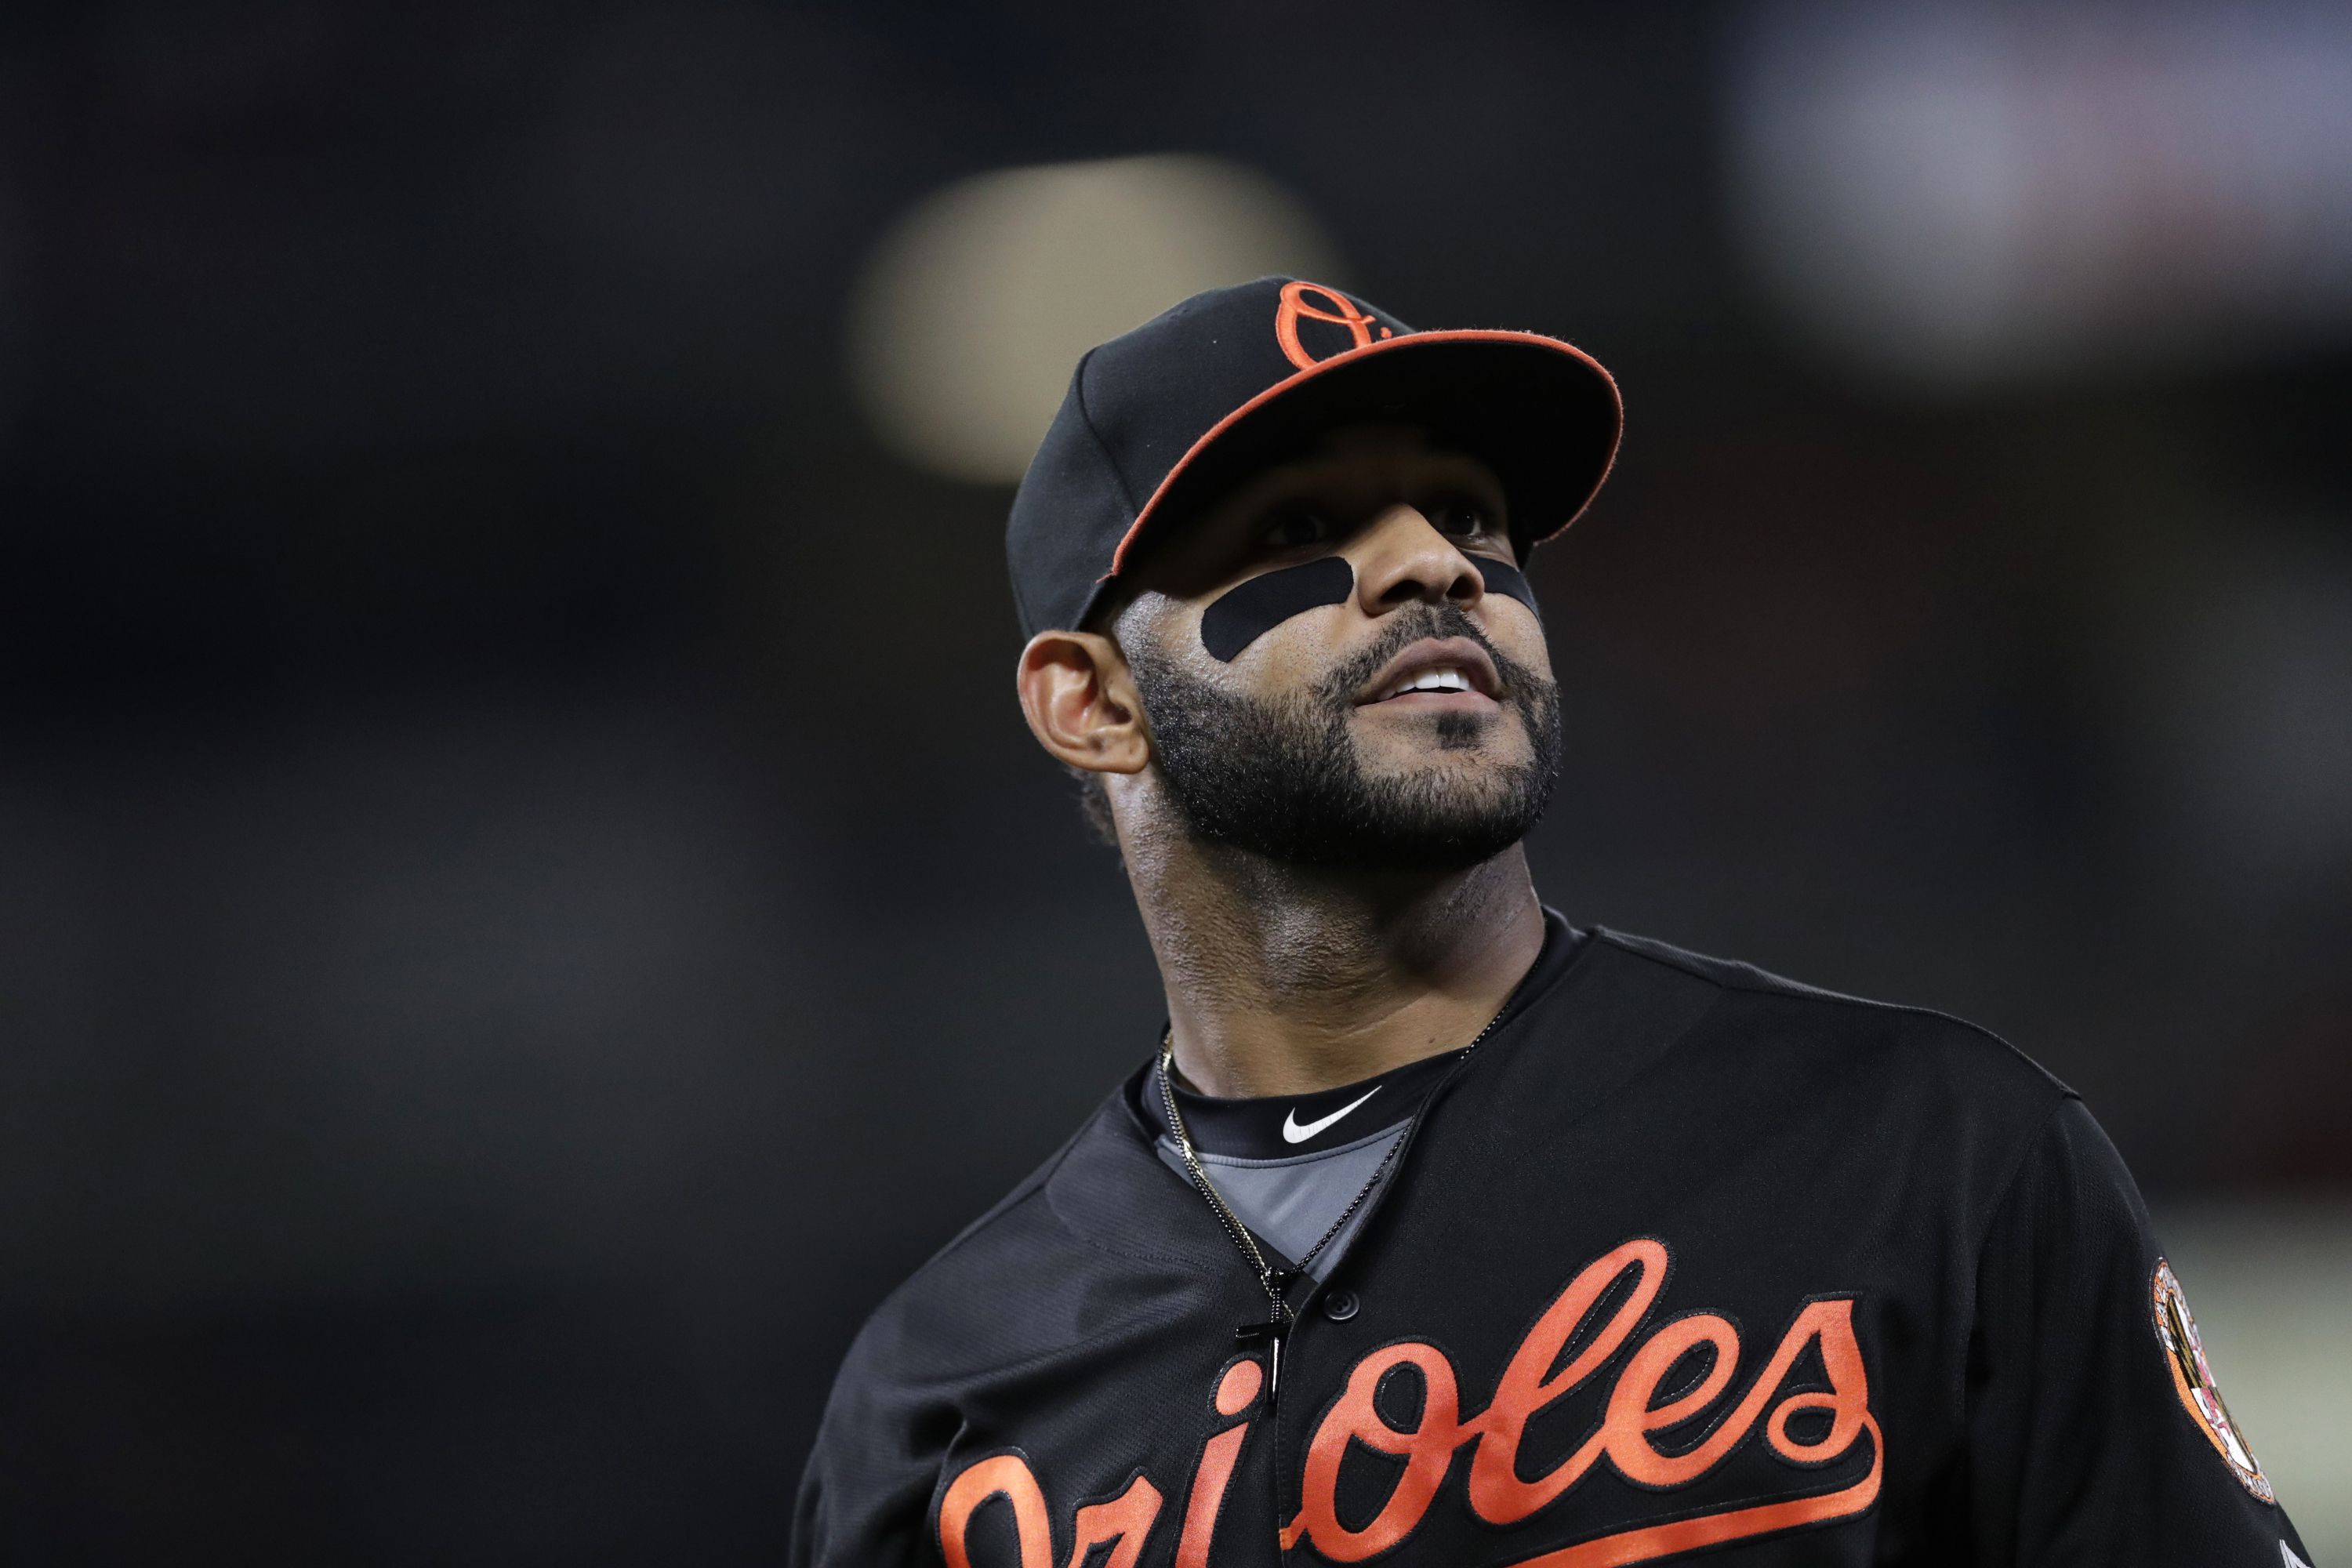 Latest trade another indication Orioles focused on future